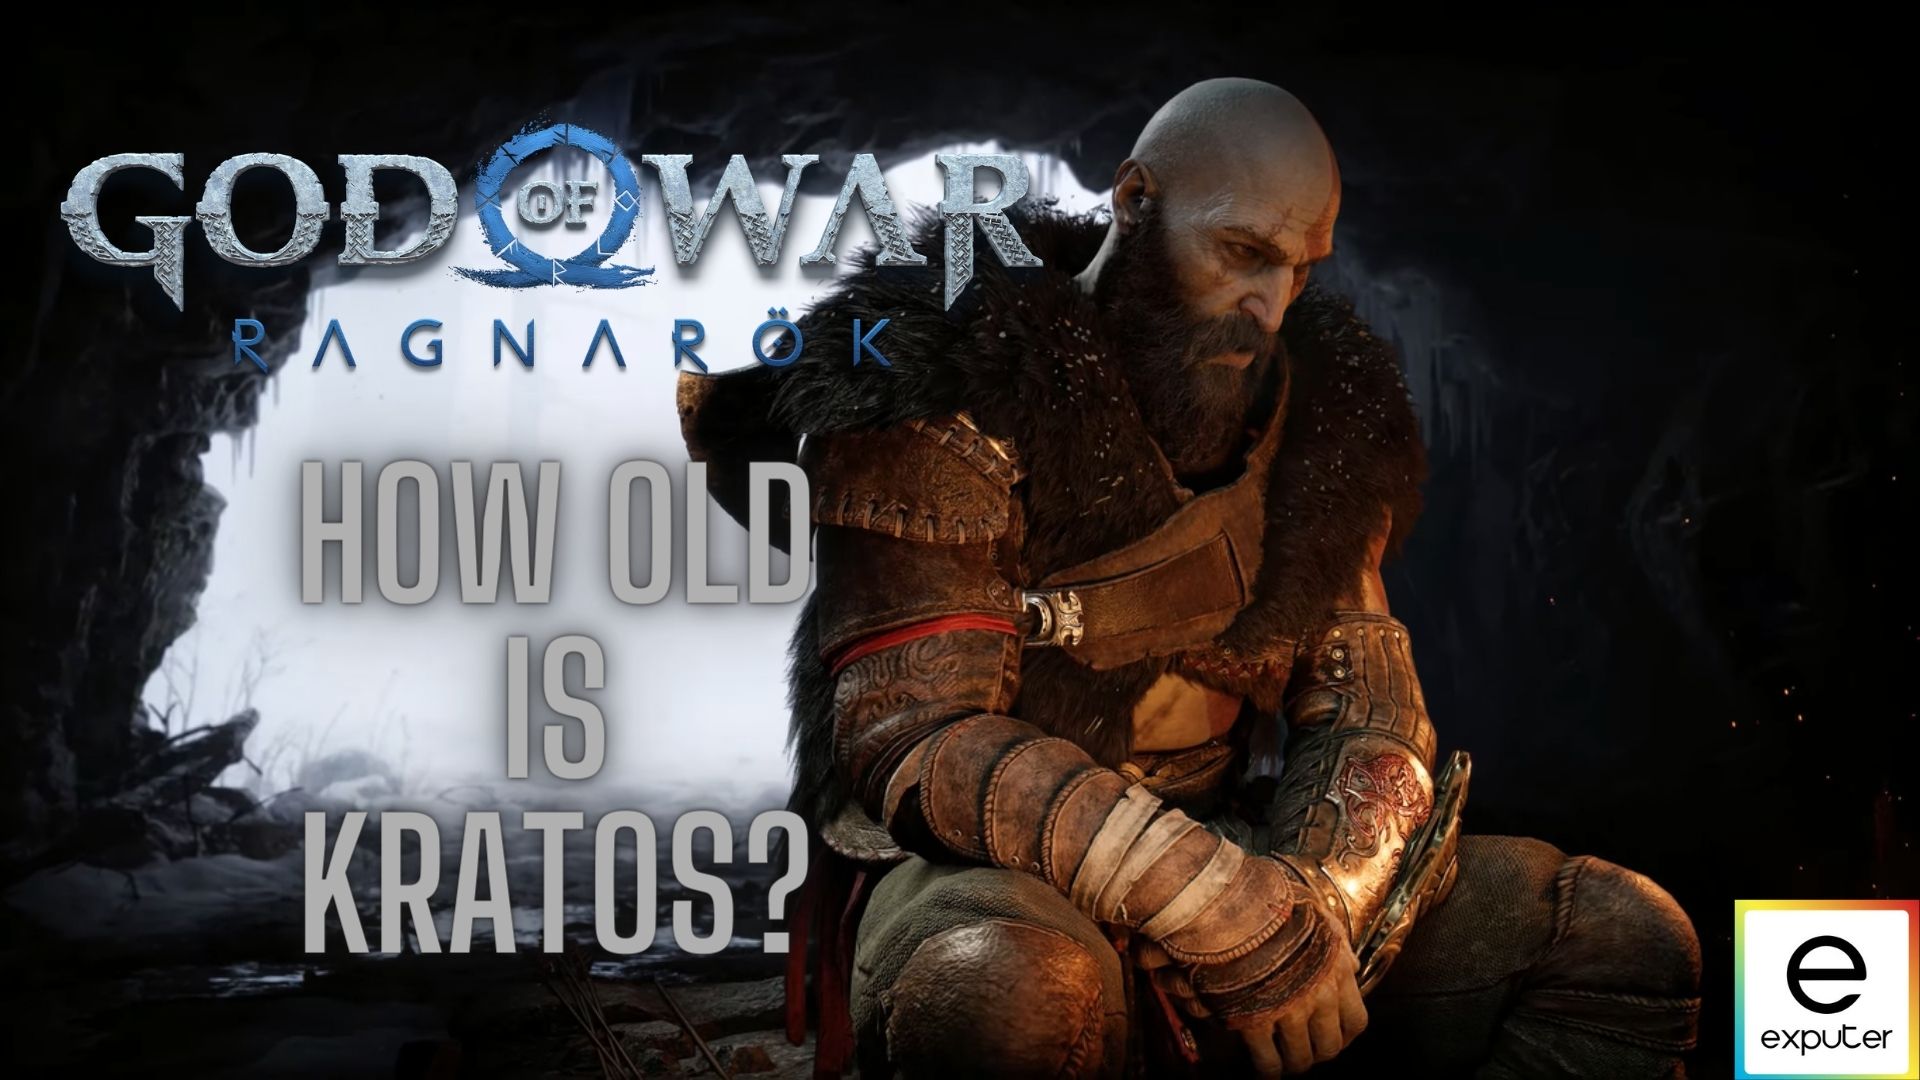 What is Kratos' age in God of War?